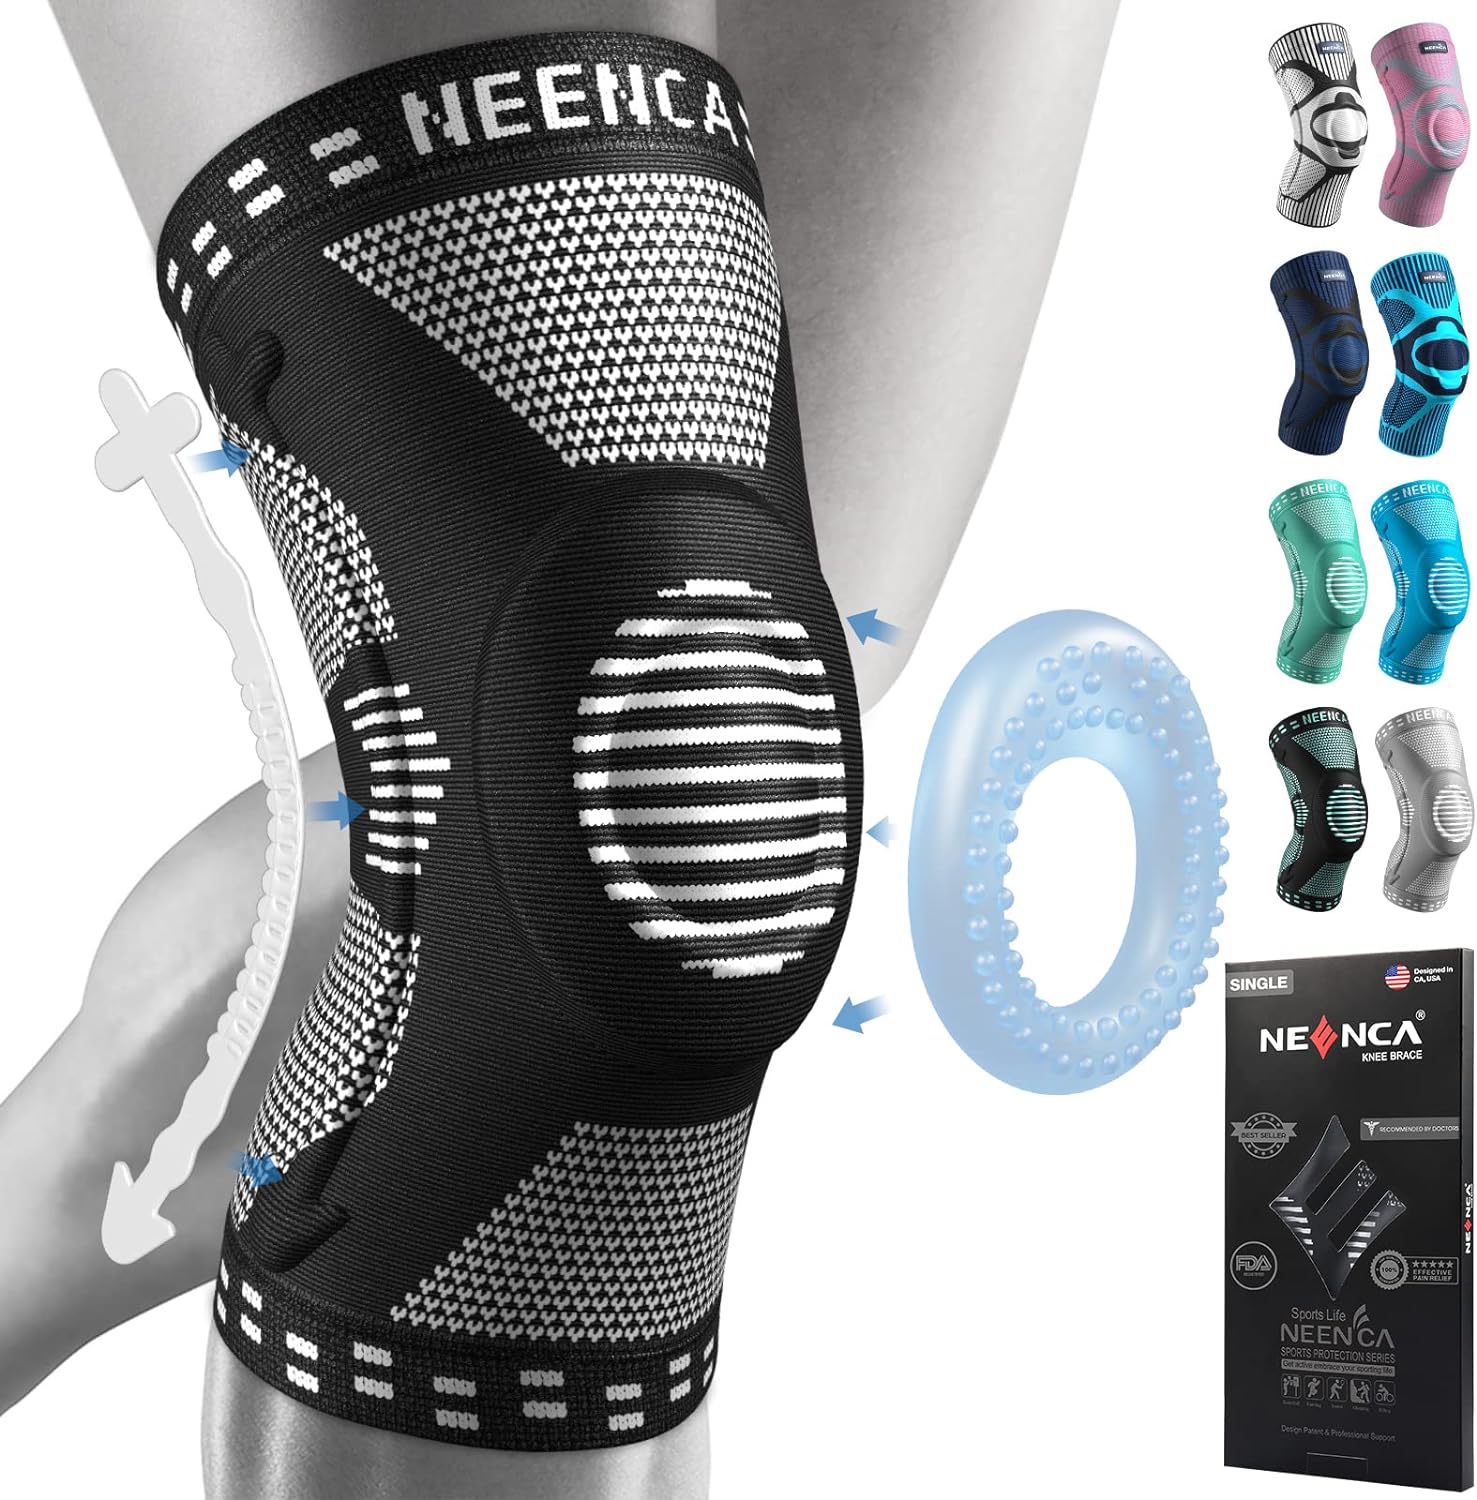 NEENCA Knee Braces for Knee Pain Relief, Compression Knee Sleeves with Patella Gel Pad Side Stabilizers, Knee Support for Weightlifting, Running, Workout, Arthritis, Meniscus Tear, Men Women. ACE-53